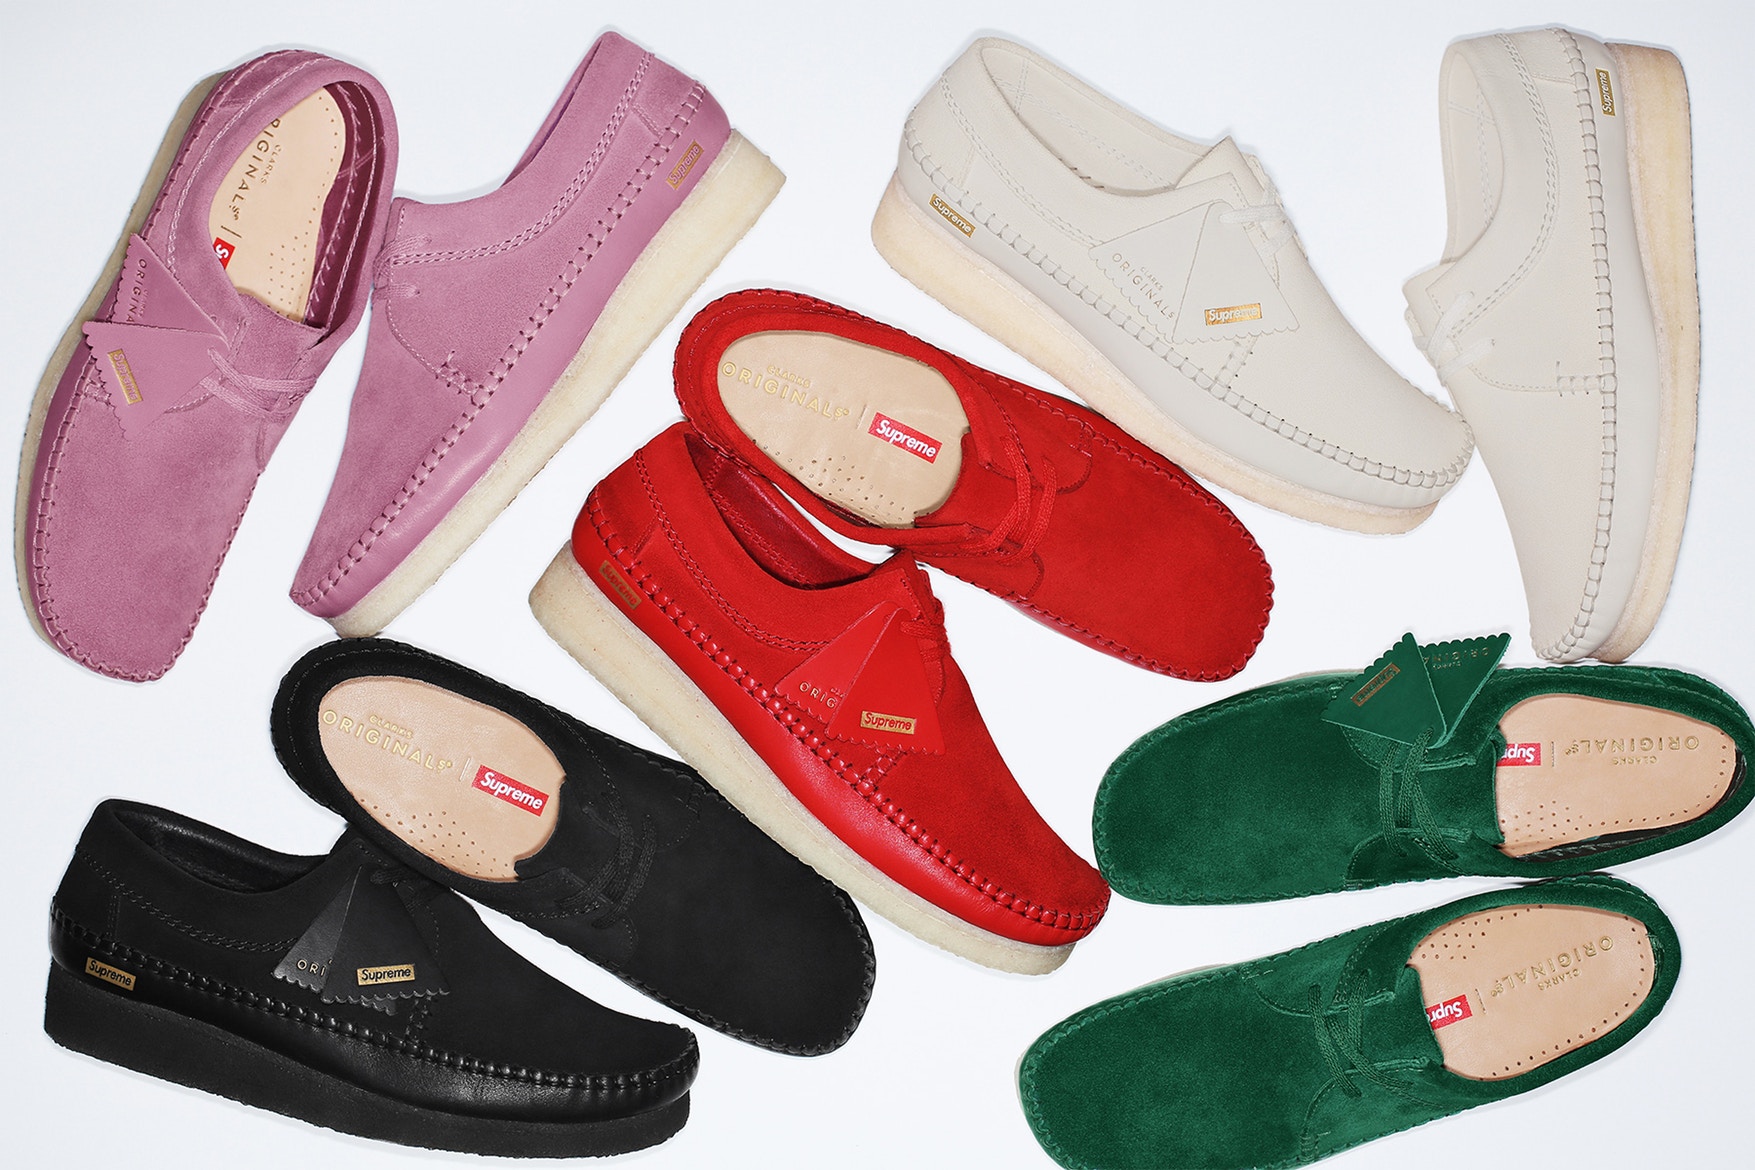 Supreme x Clarks Wallabee coming May 24th